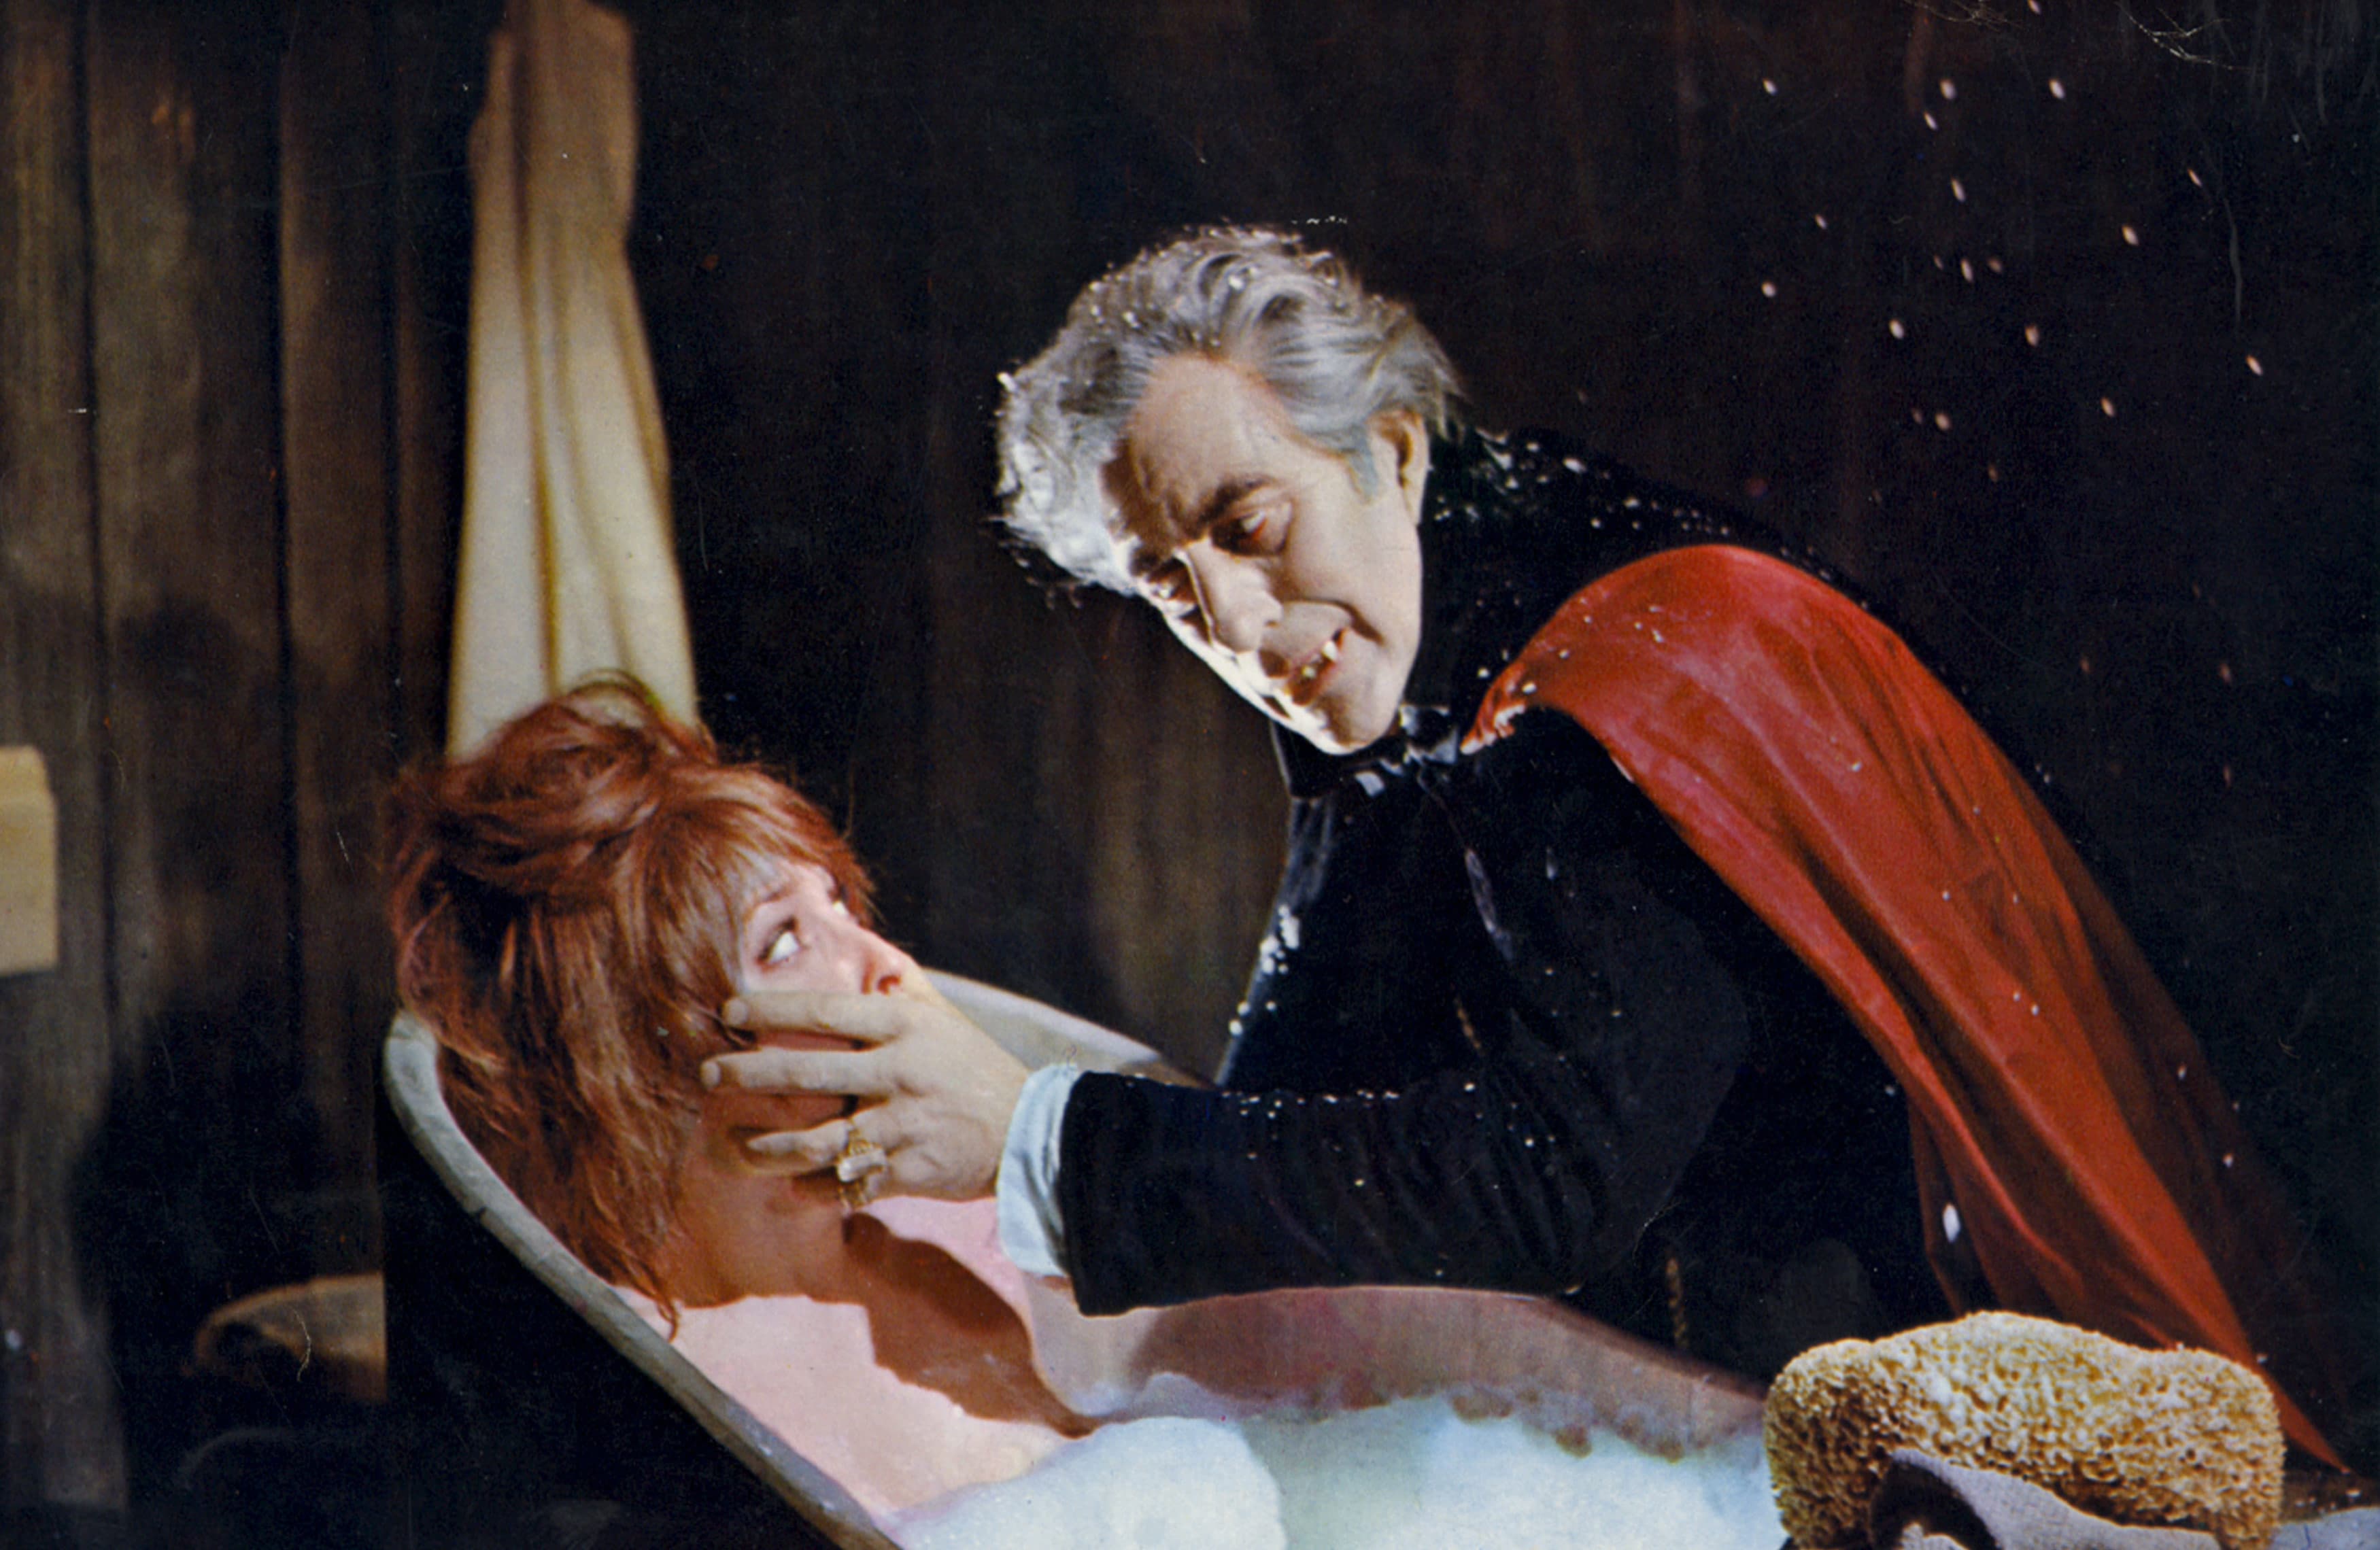 34-facts-about-the-movie-the-fearless-vampire-killers